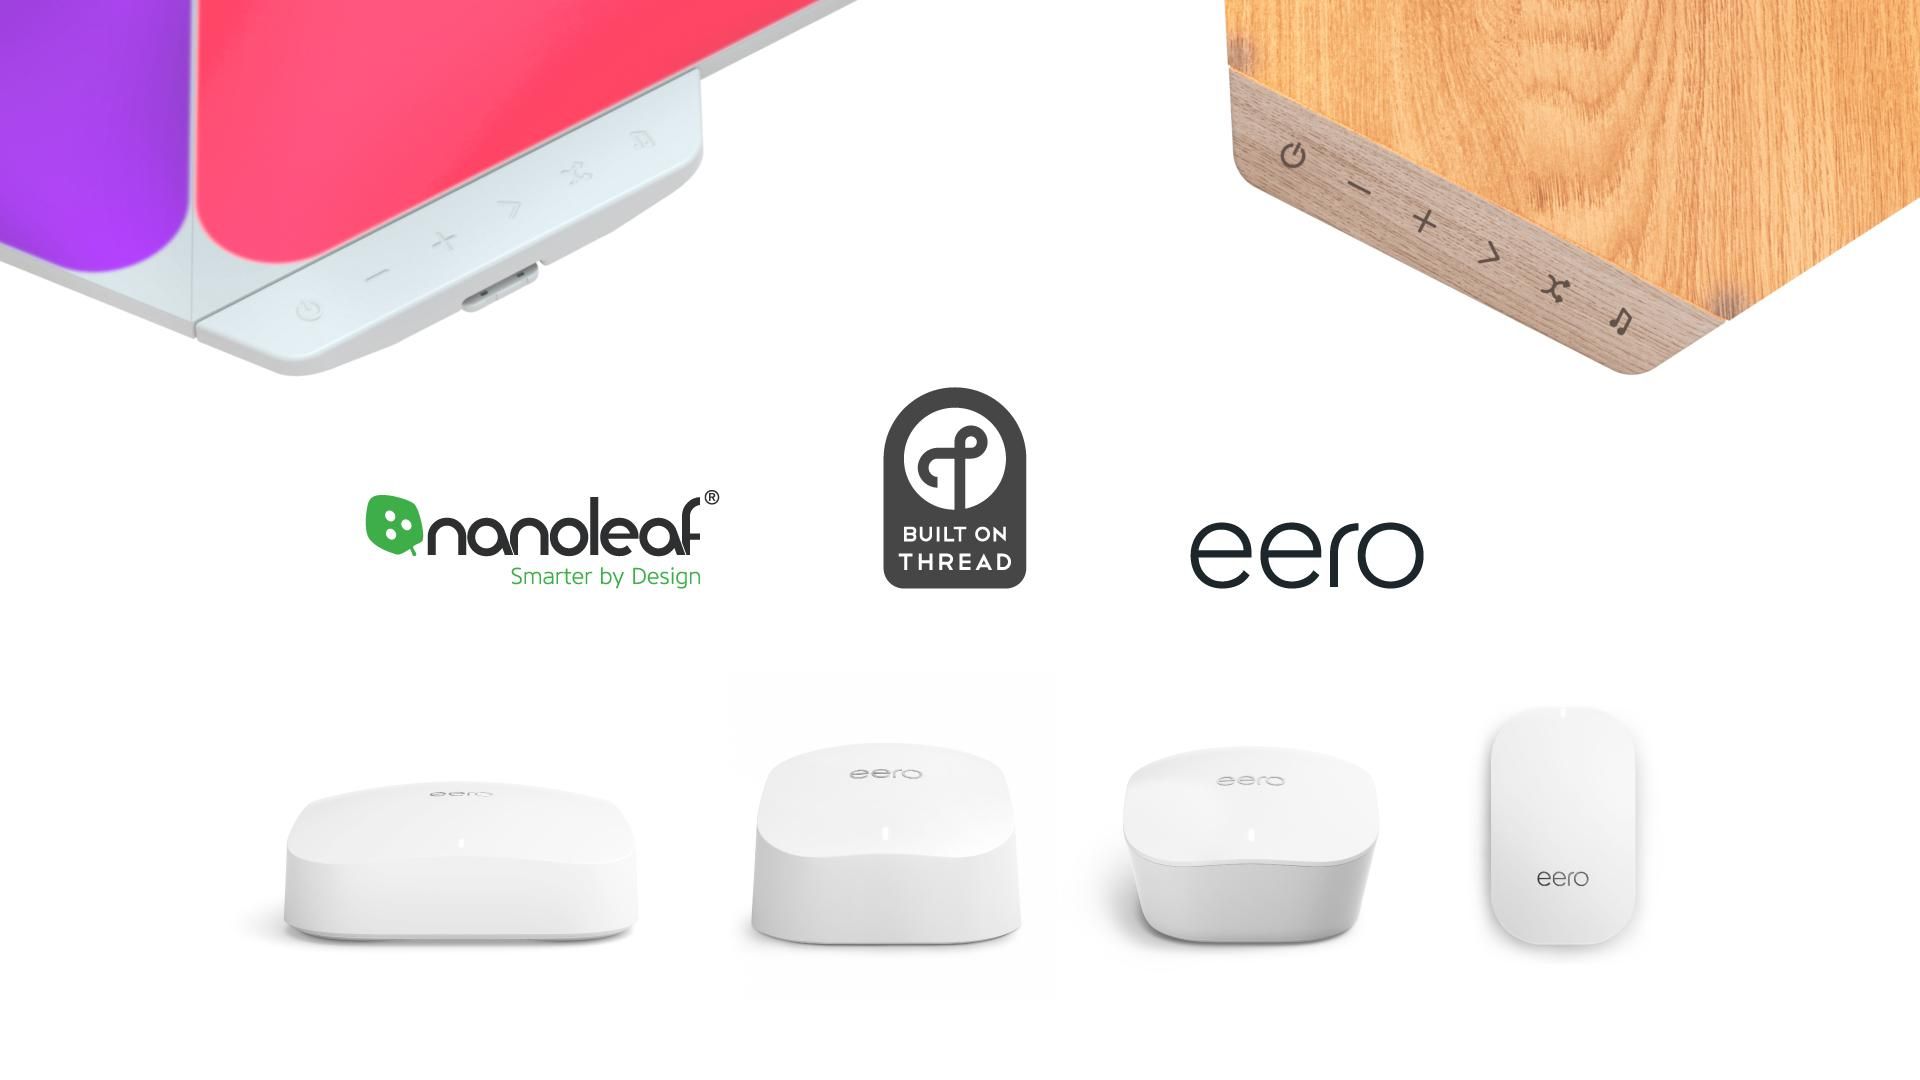 Nanoleaf and eero partner together on wi-fi mesh network and new Thread routers.